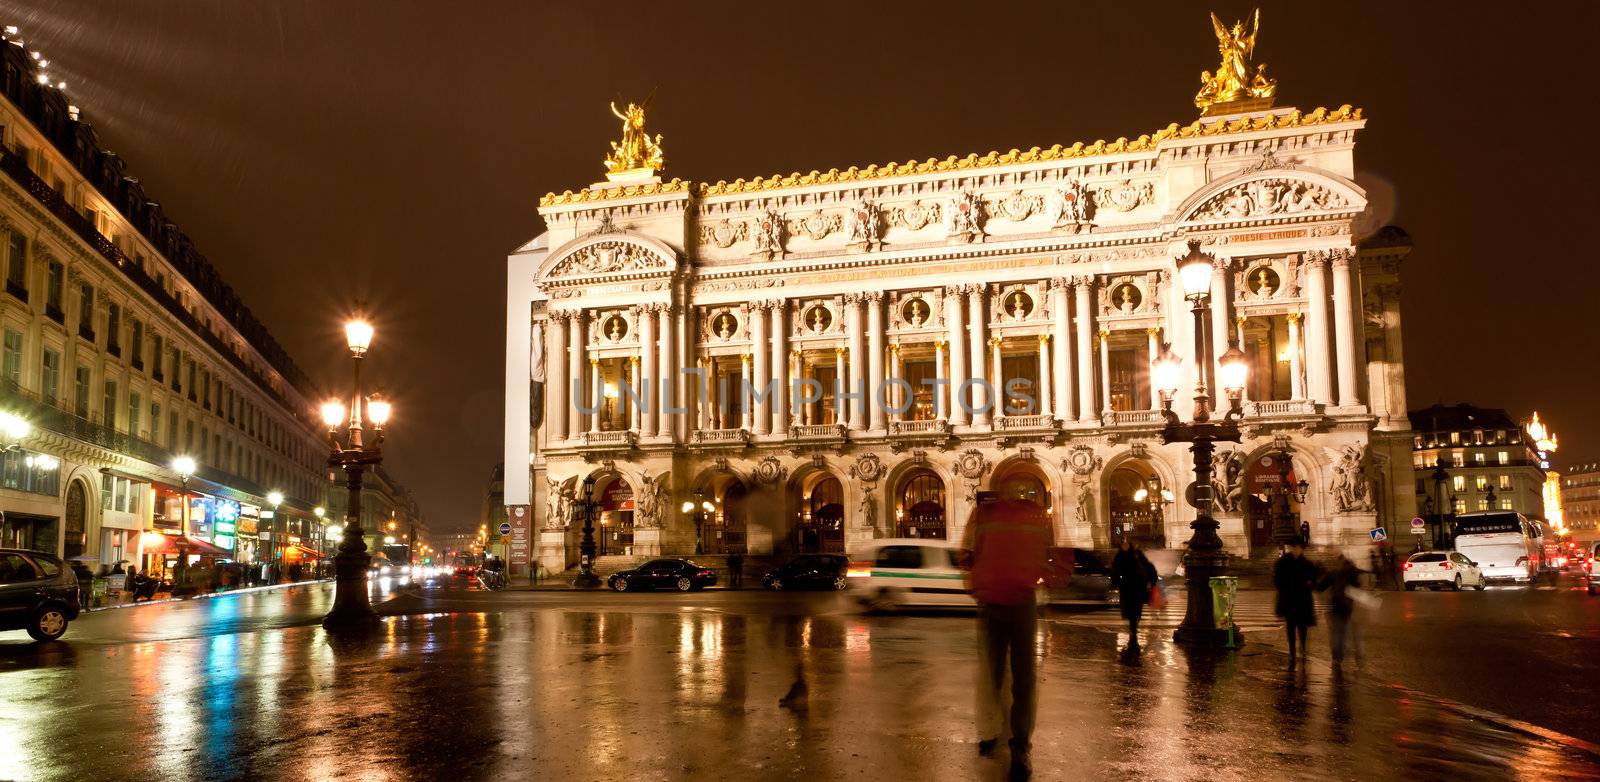 the grand Opera in Paris  by gary718